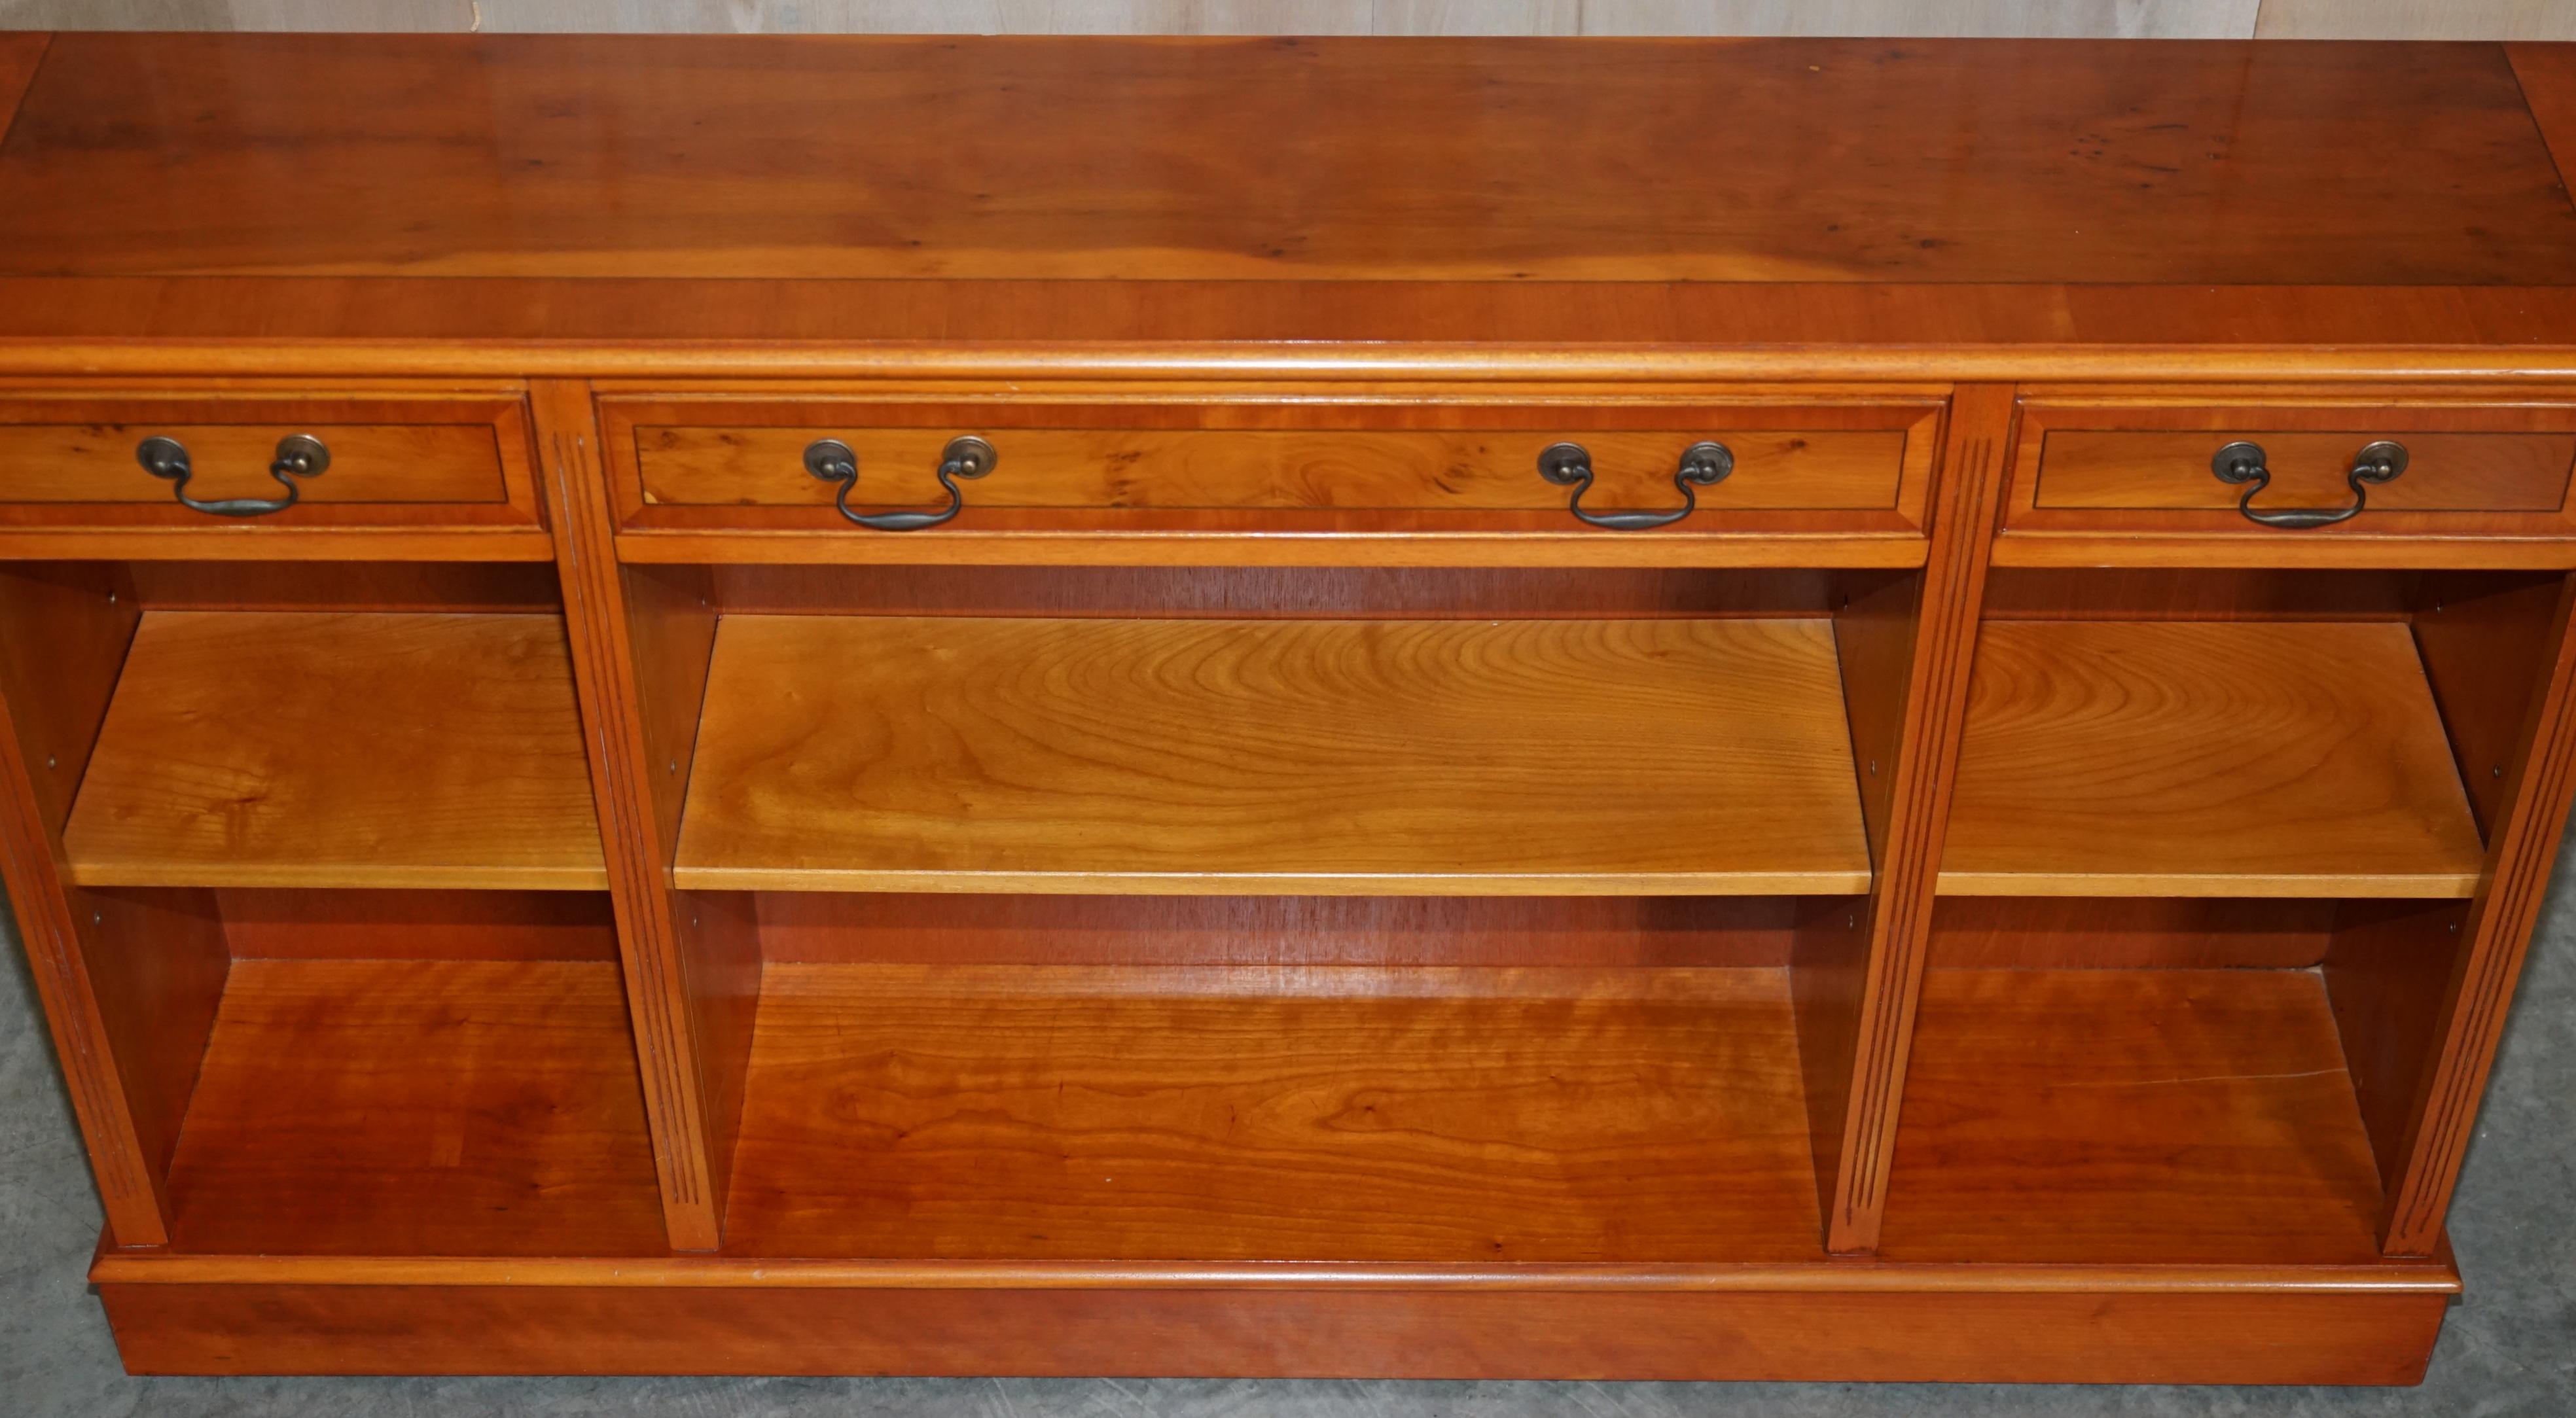 20th Century Vintage Burr Yew Wood Dwarf Open Bookcase / Sideboard with Three Large Drawers For Sale